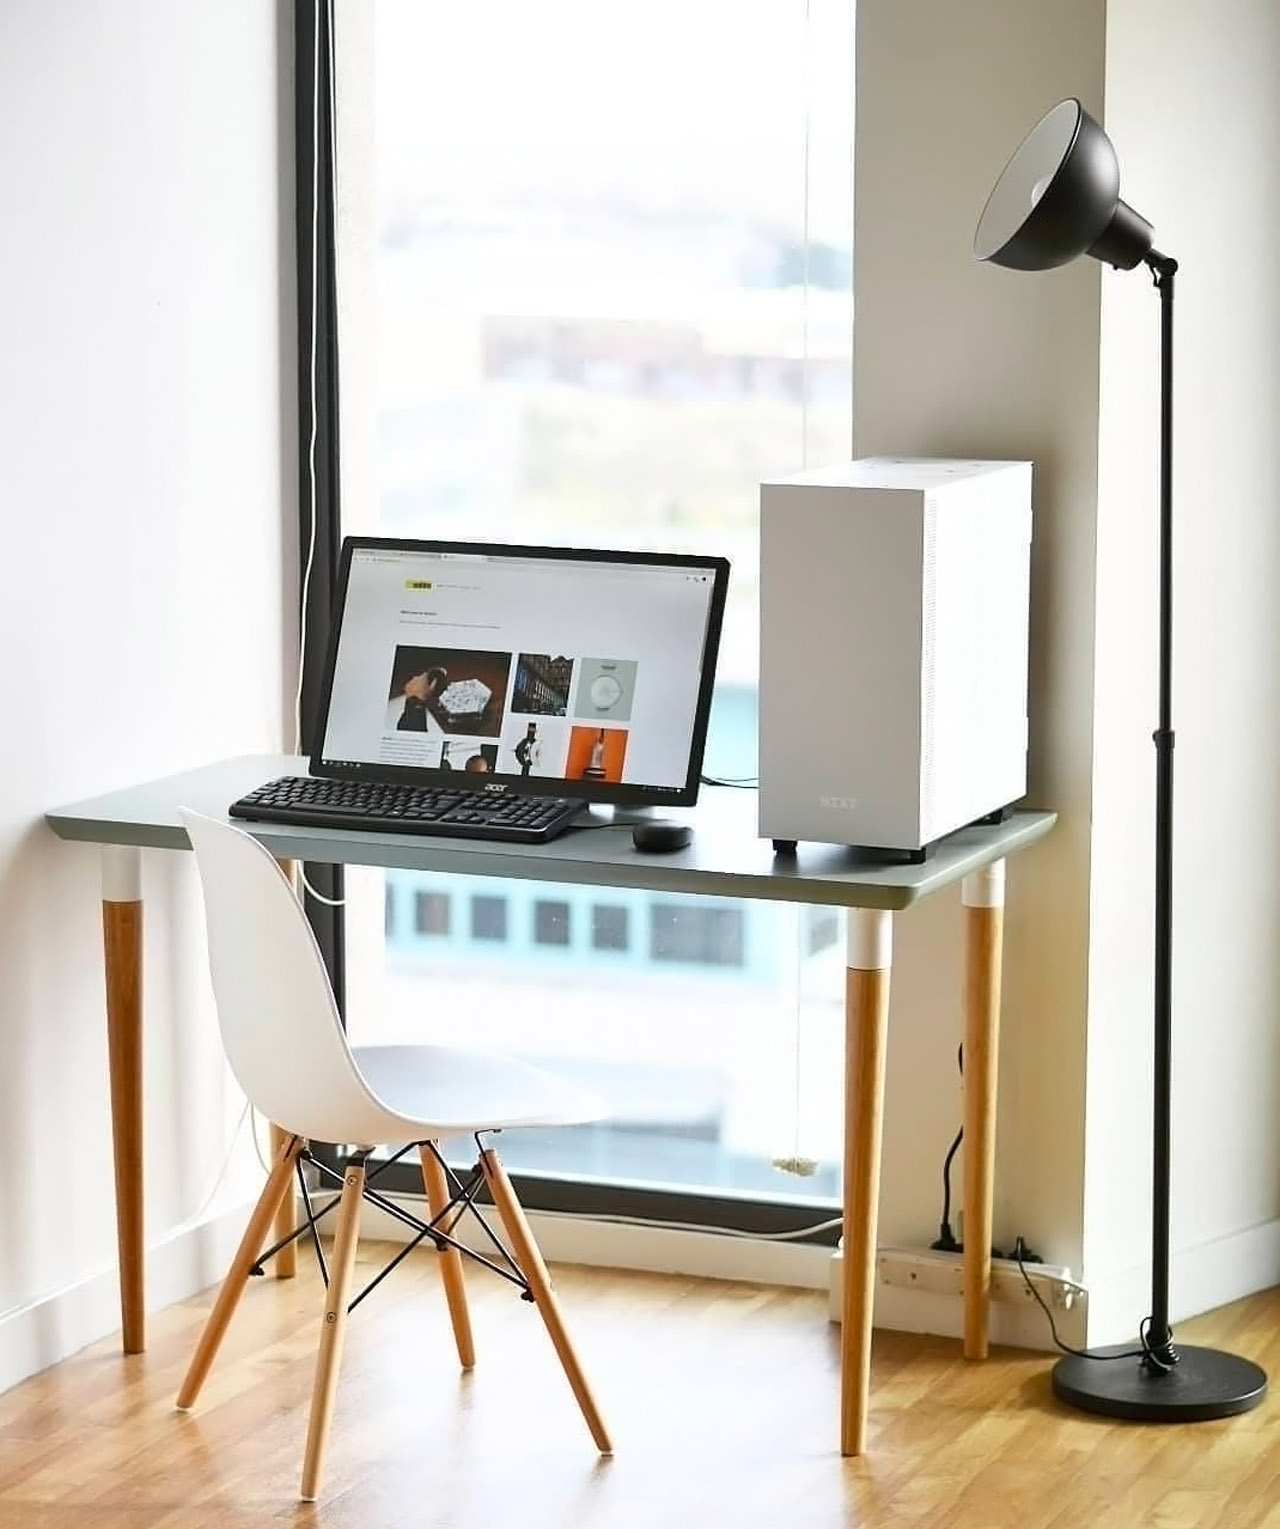 Space Saving Furniture: Small Space Desks, Desks for Small Apartments